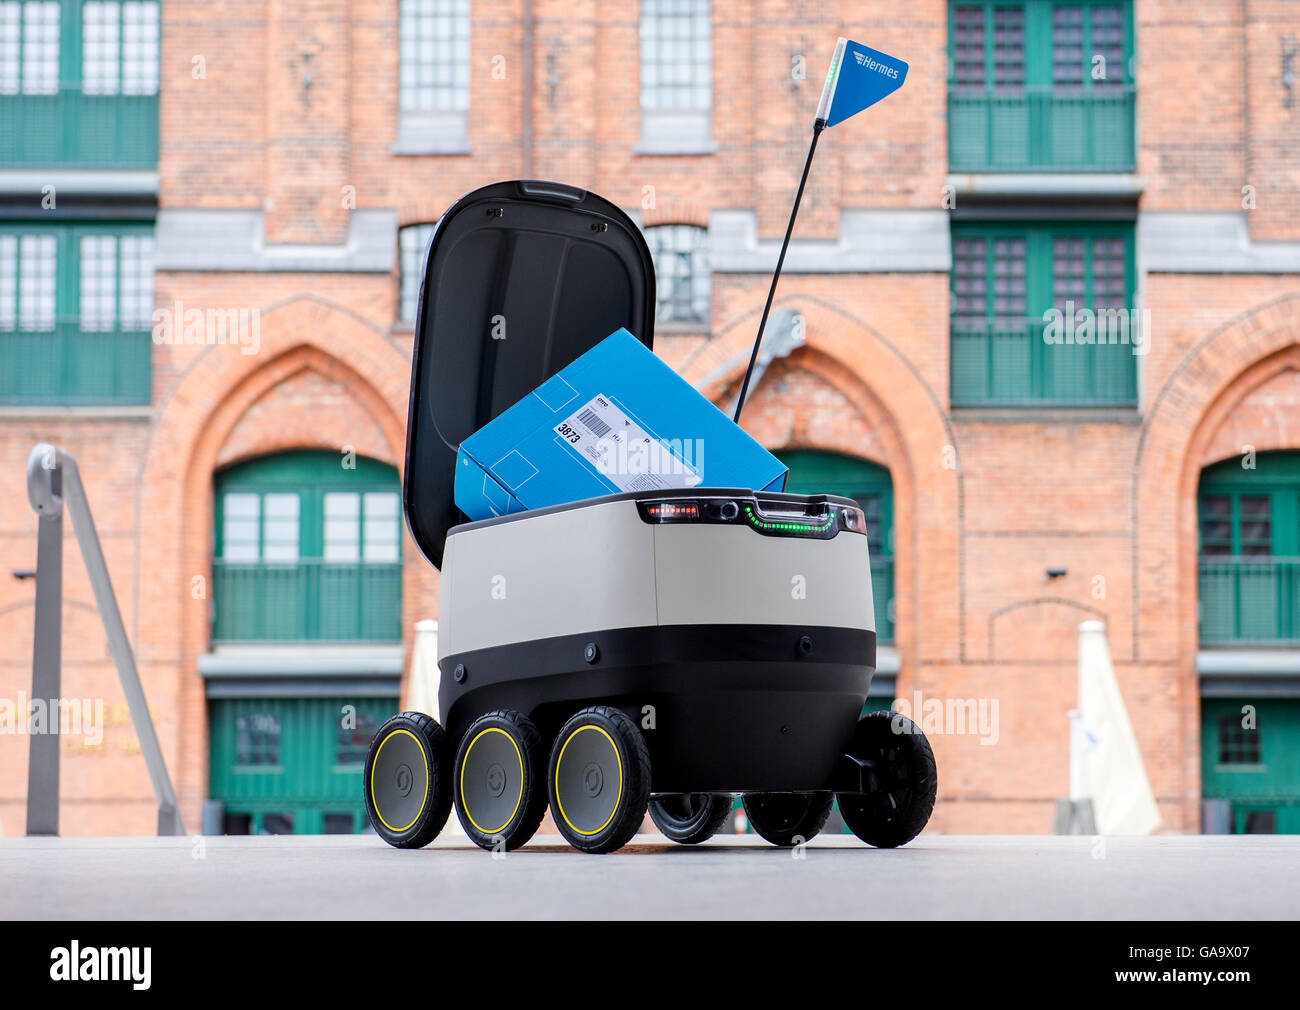 A robot developed by the company Starship Technologies for parcel delivery  company Hermes can be seen in Hamburg, Germany, 04 August 2016. In August  Hermes began a test-run of robot delivery in